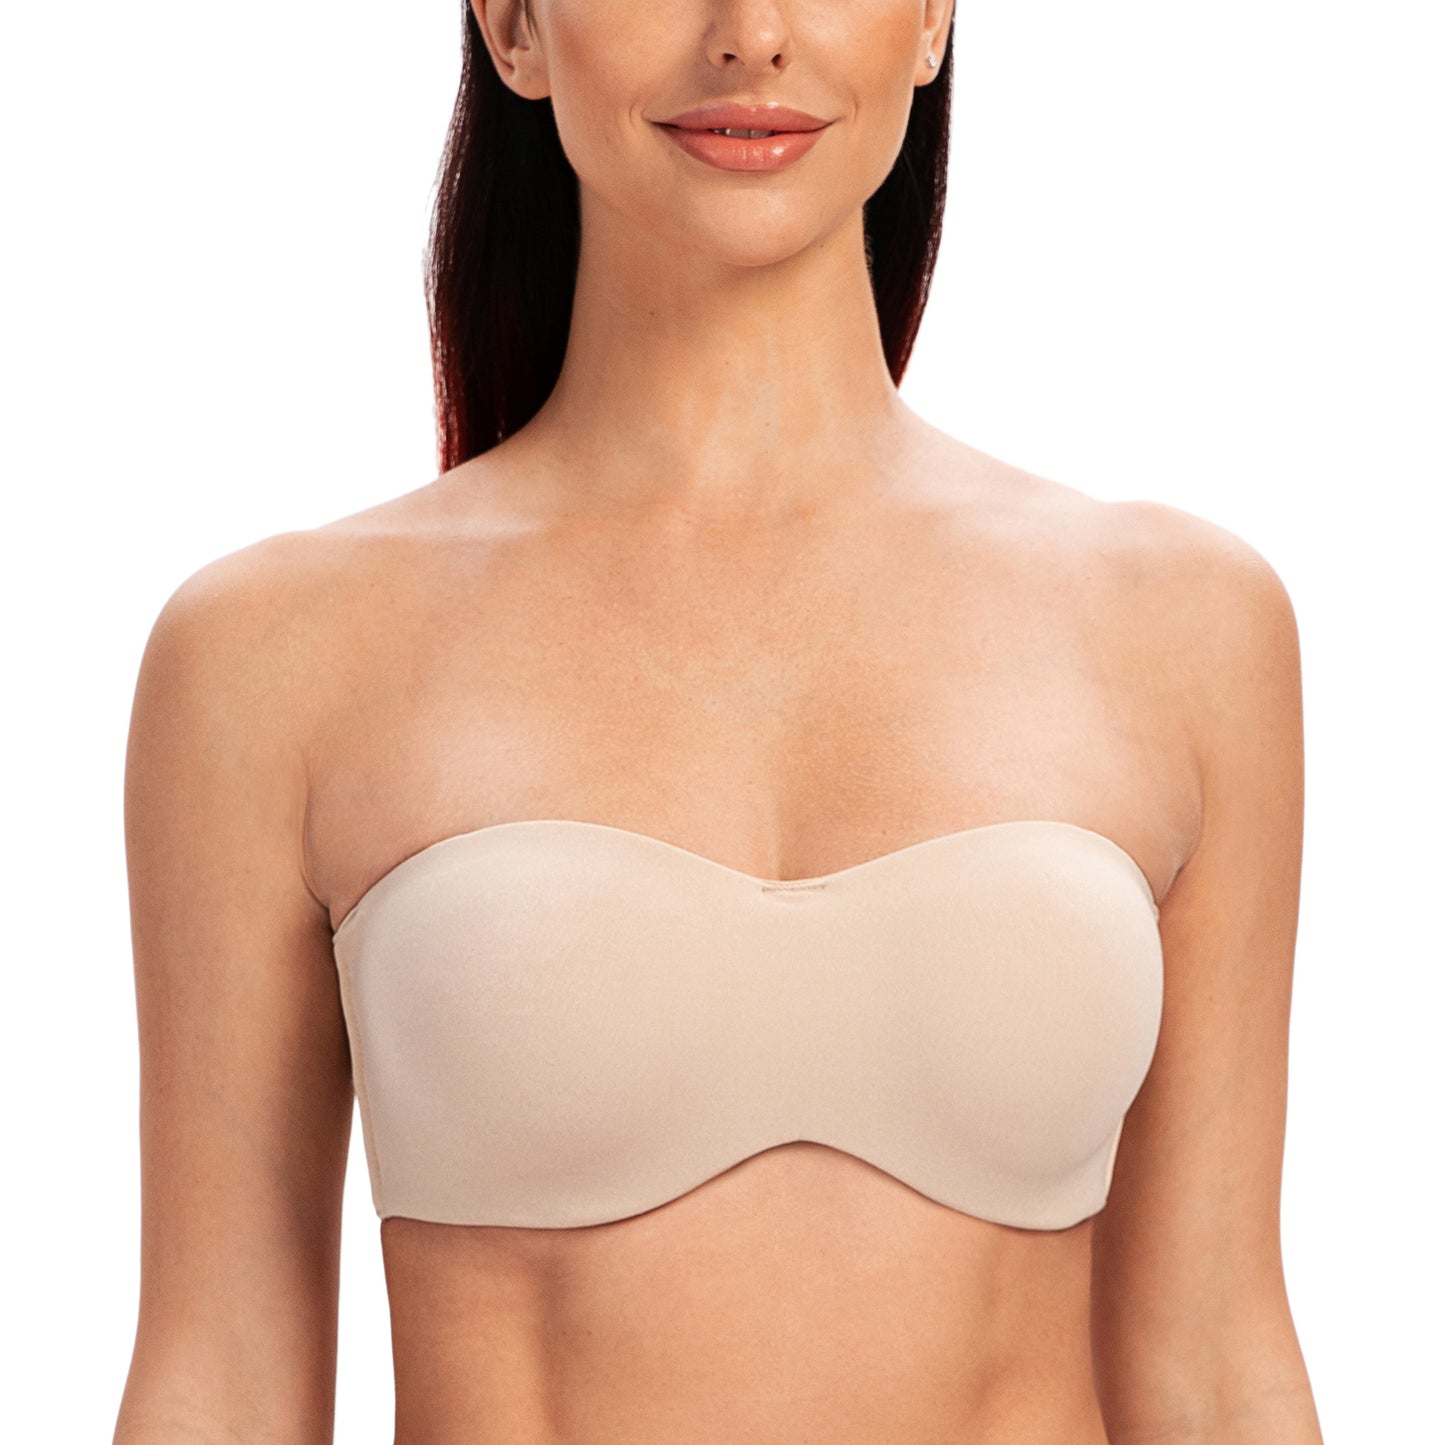 MELENECA Strapless Push Up Bra Heather Gray with Clear Straps US